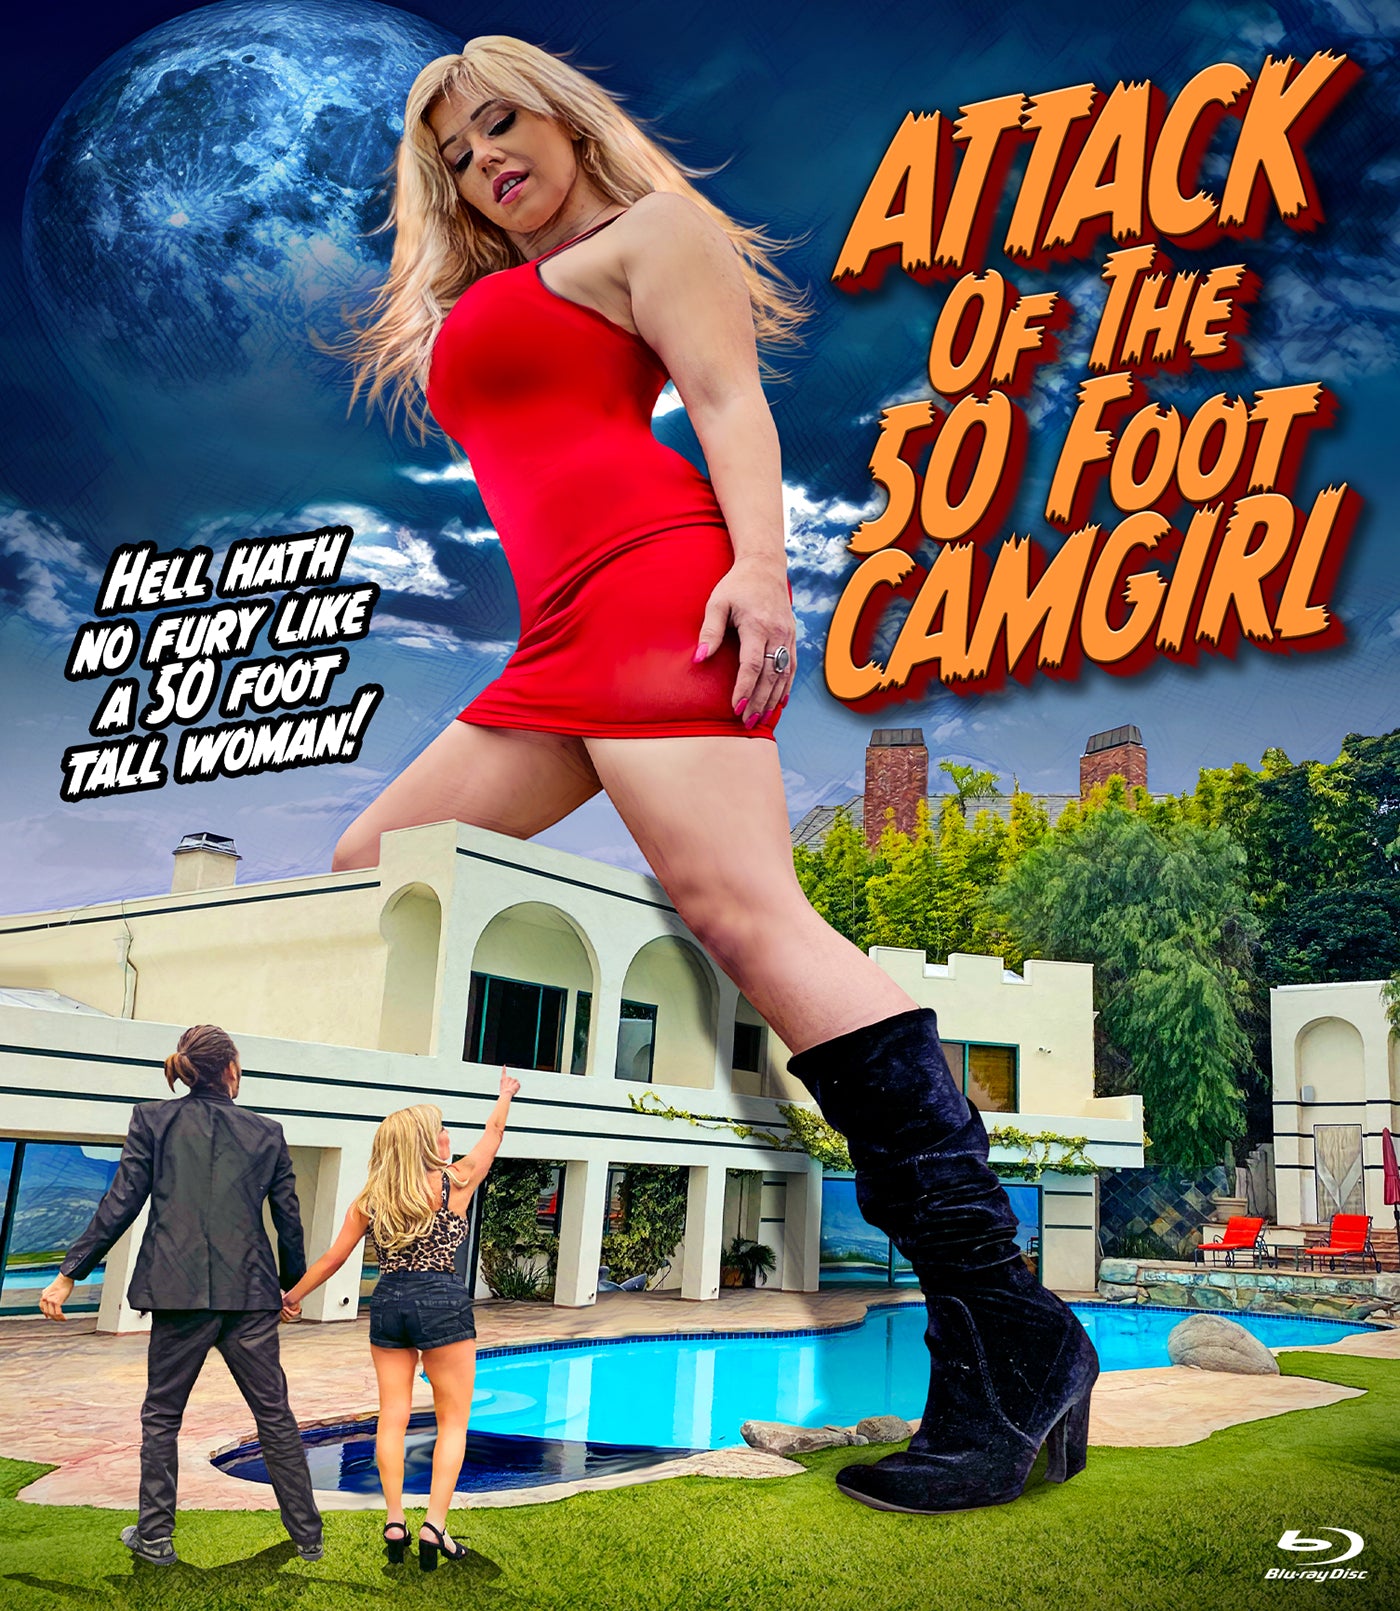 ATTACK OF THE 50 FOOT CAMGIRL BLU-RAY